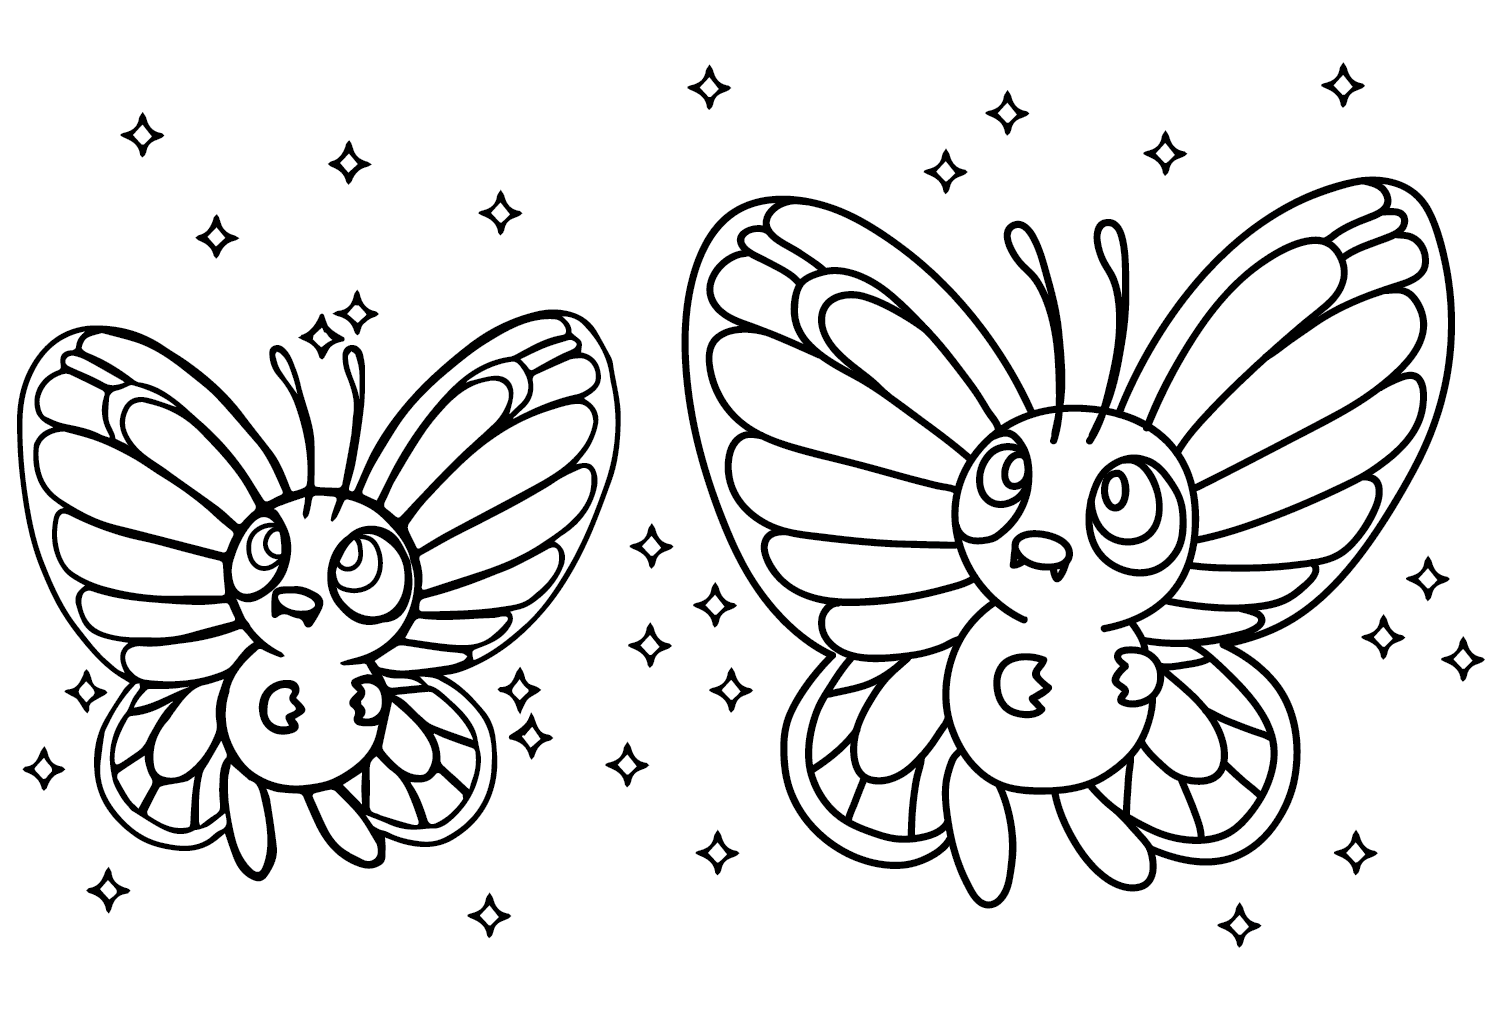 Butterfree Images to Color from Butterfree